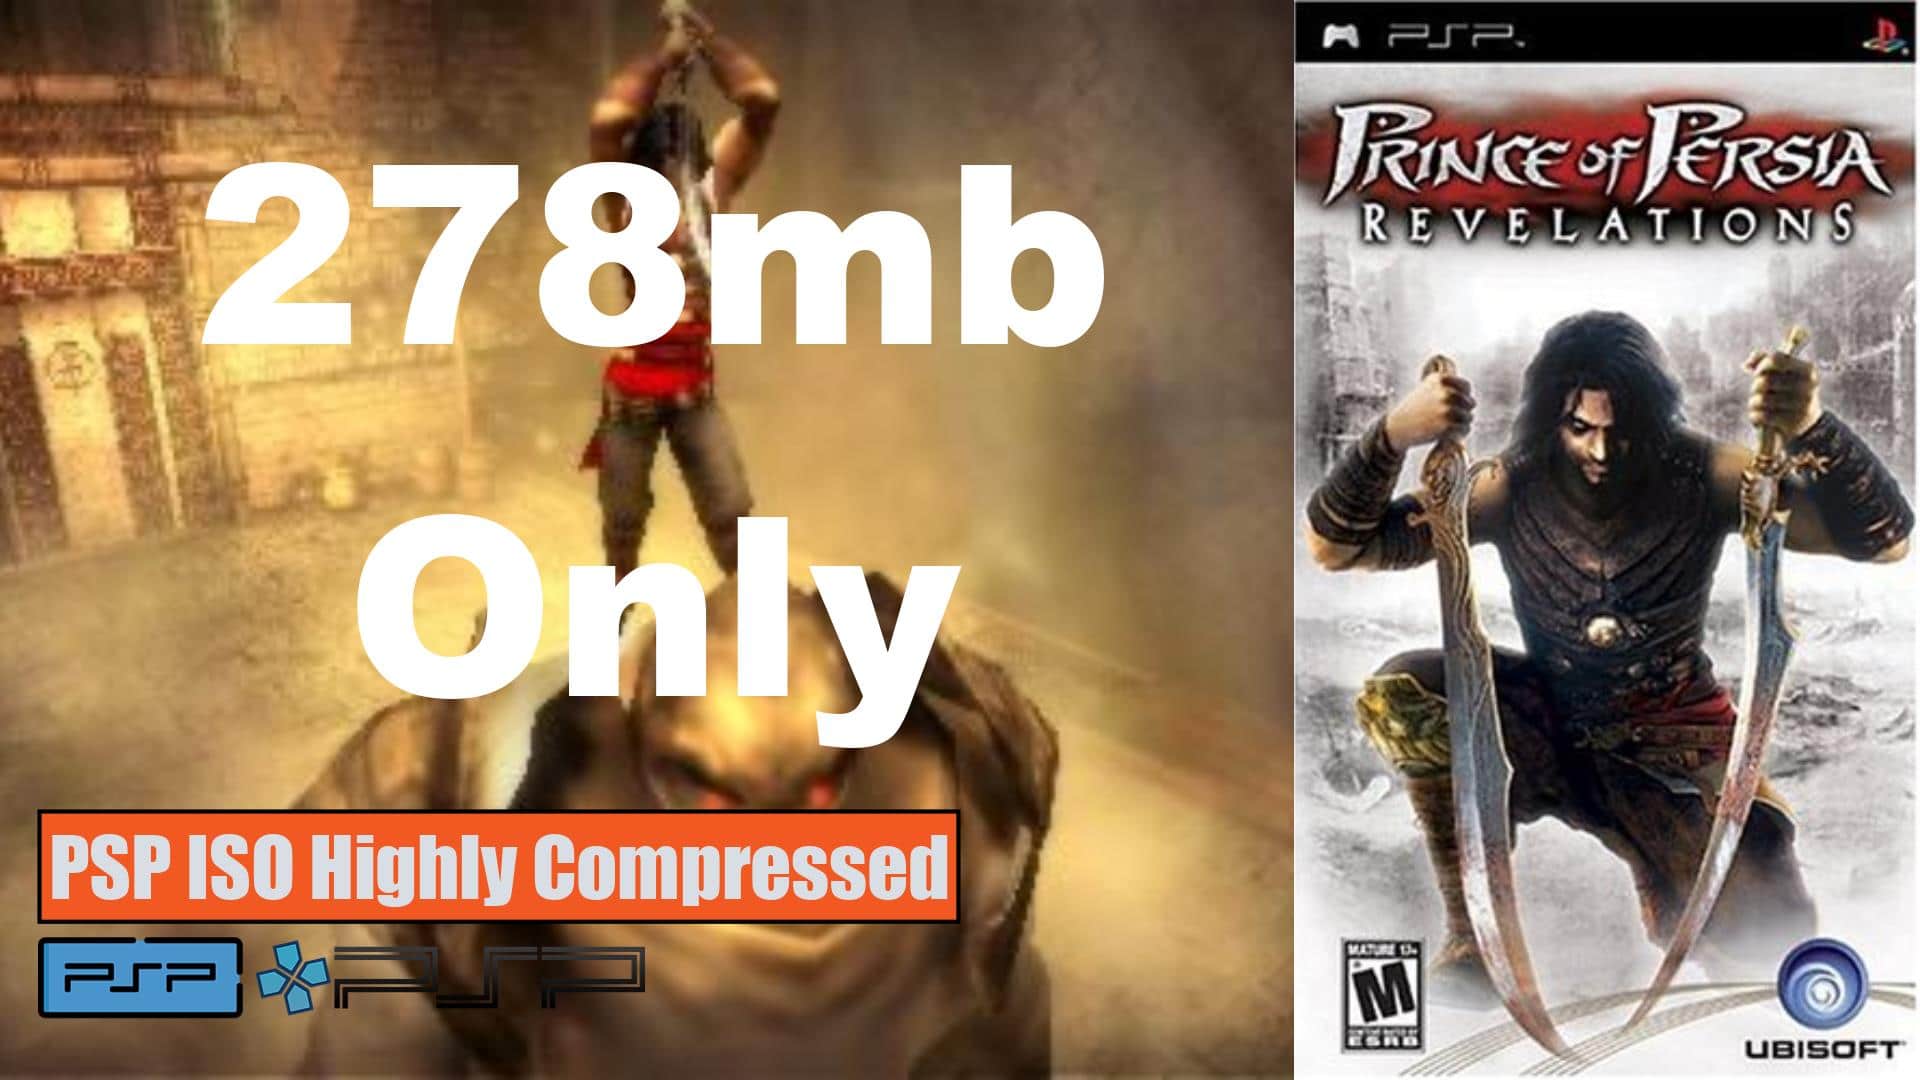 prince-of-persia-revelations-psp-iso-highly-compressed-saferoms